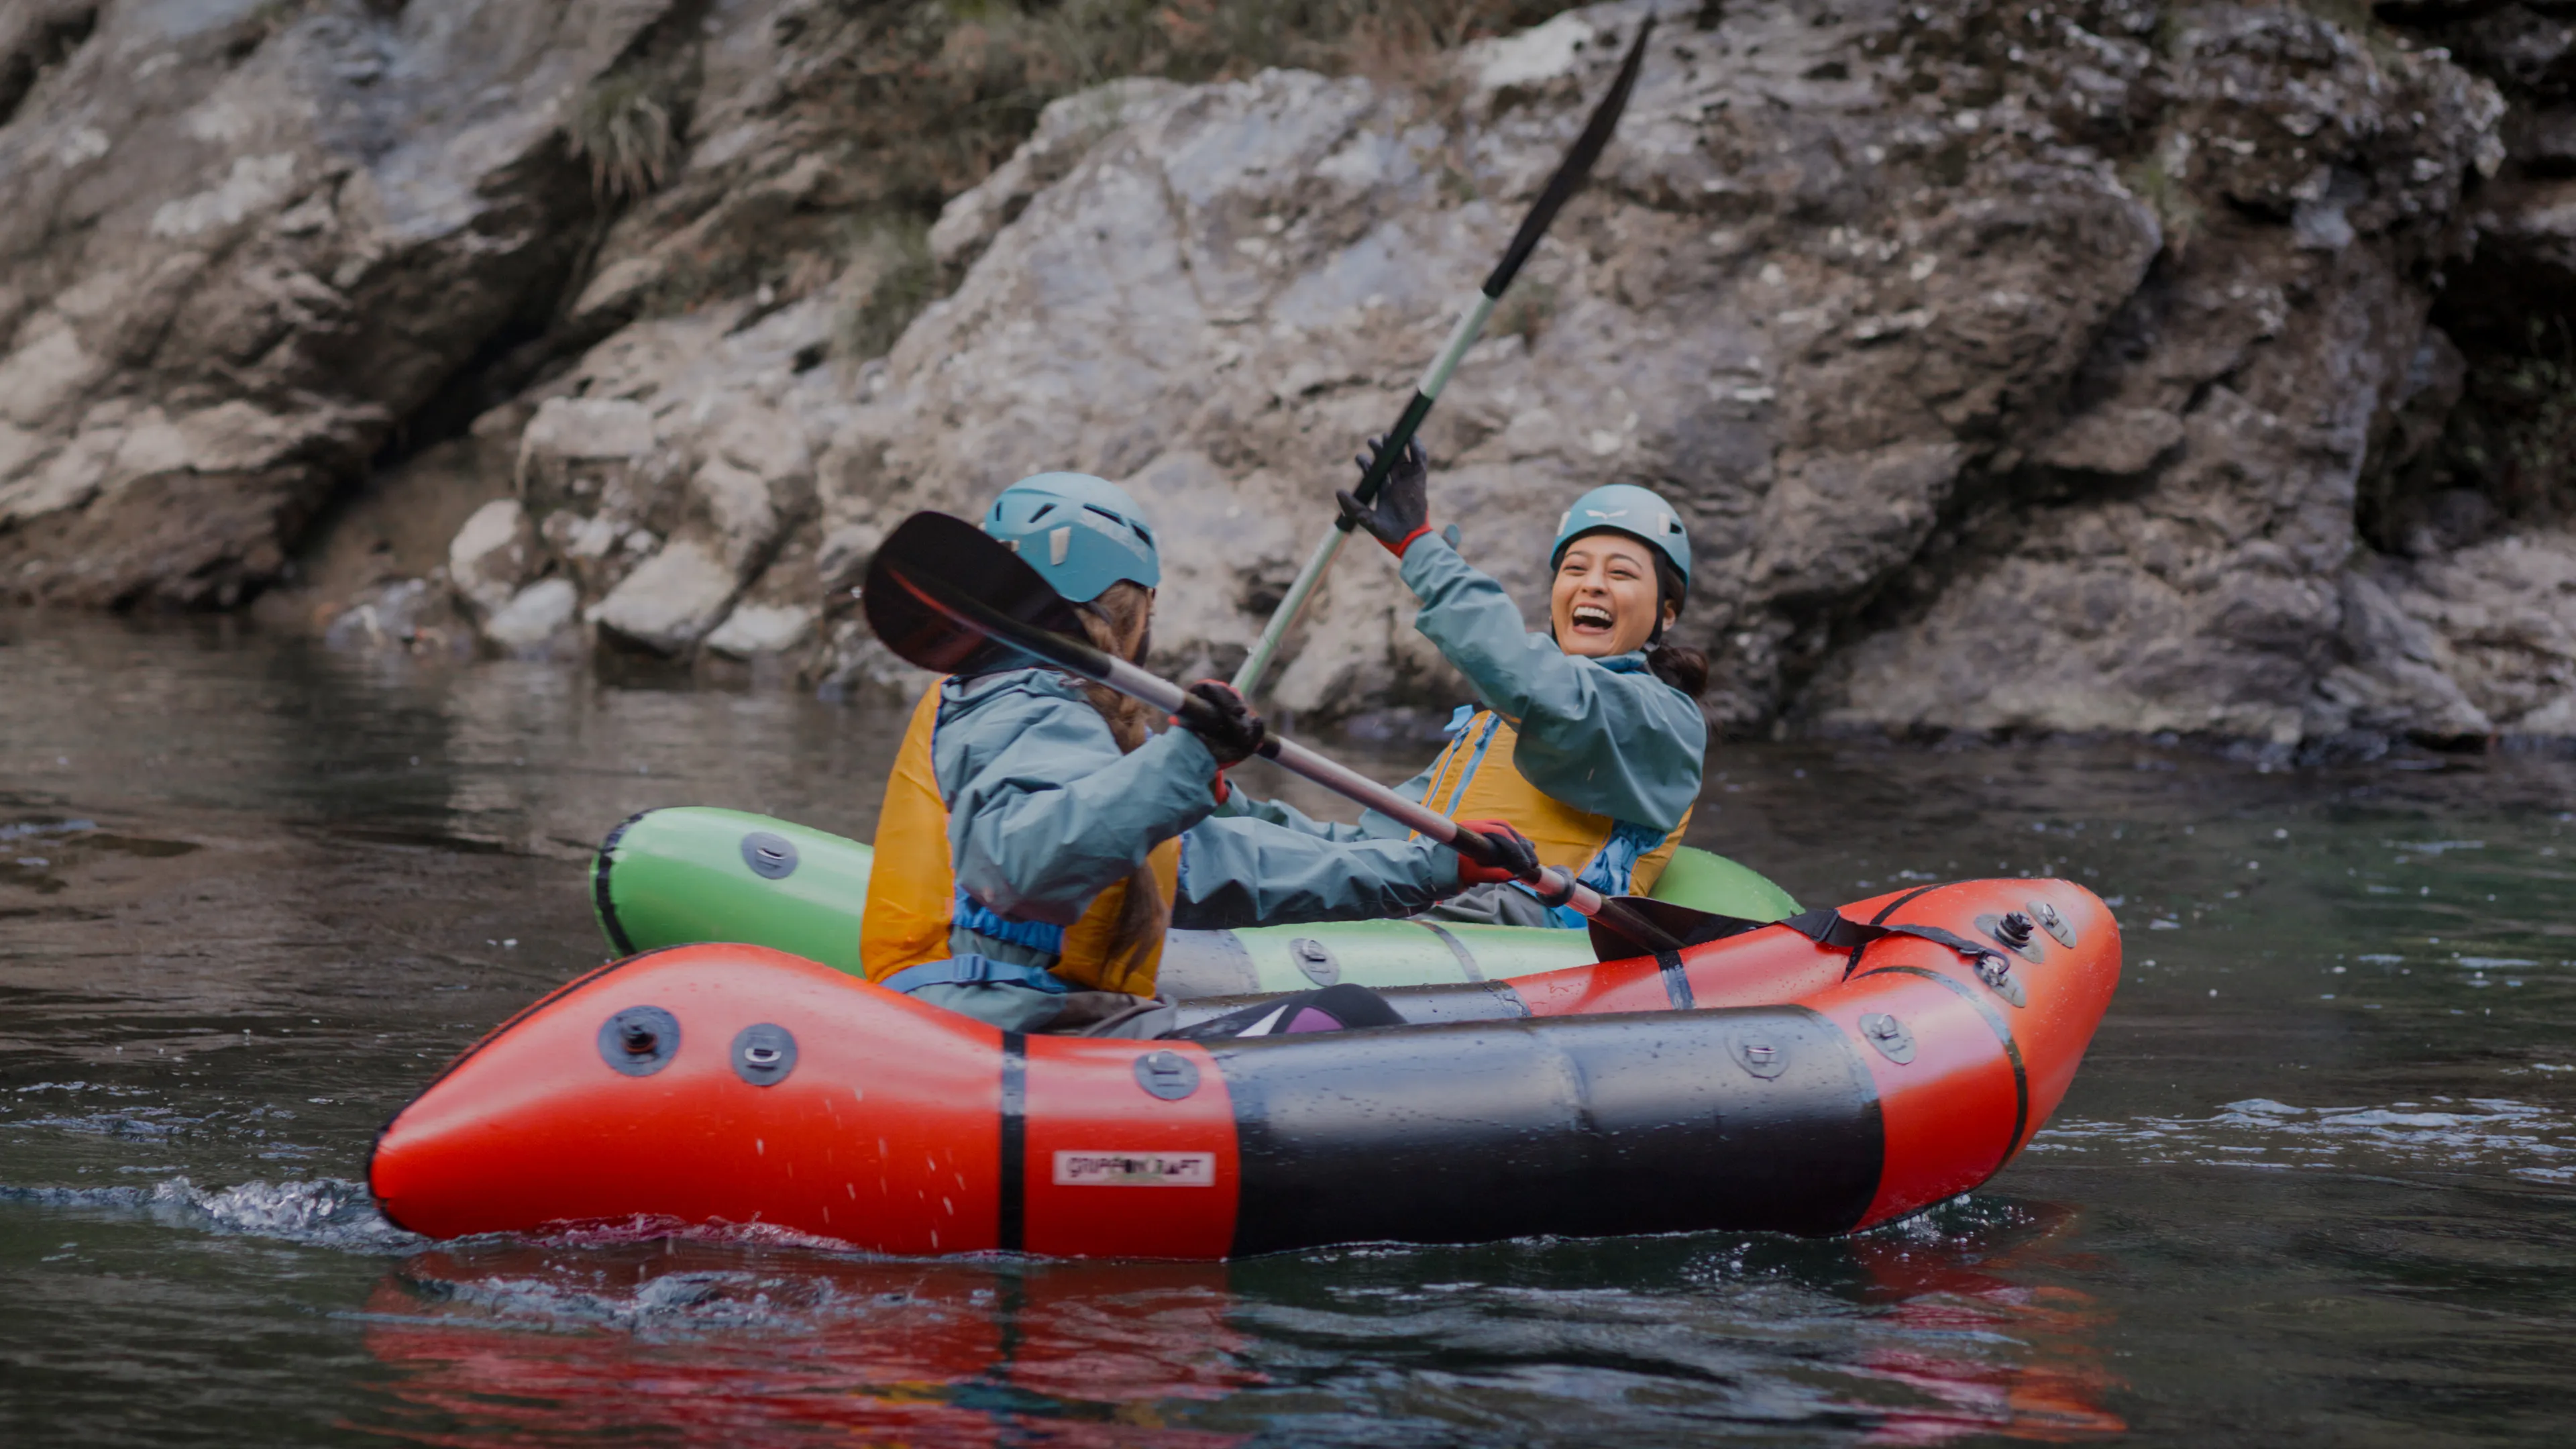 Packrafting tour and pizza making with locals in secluded Okuise